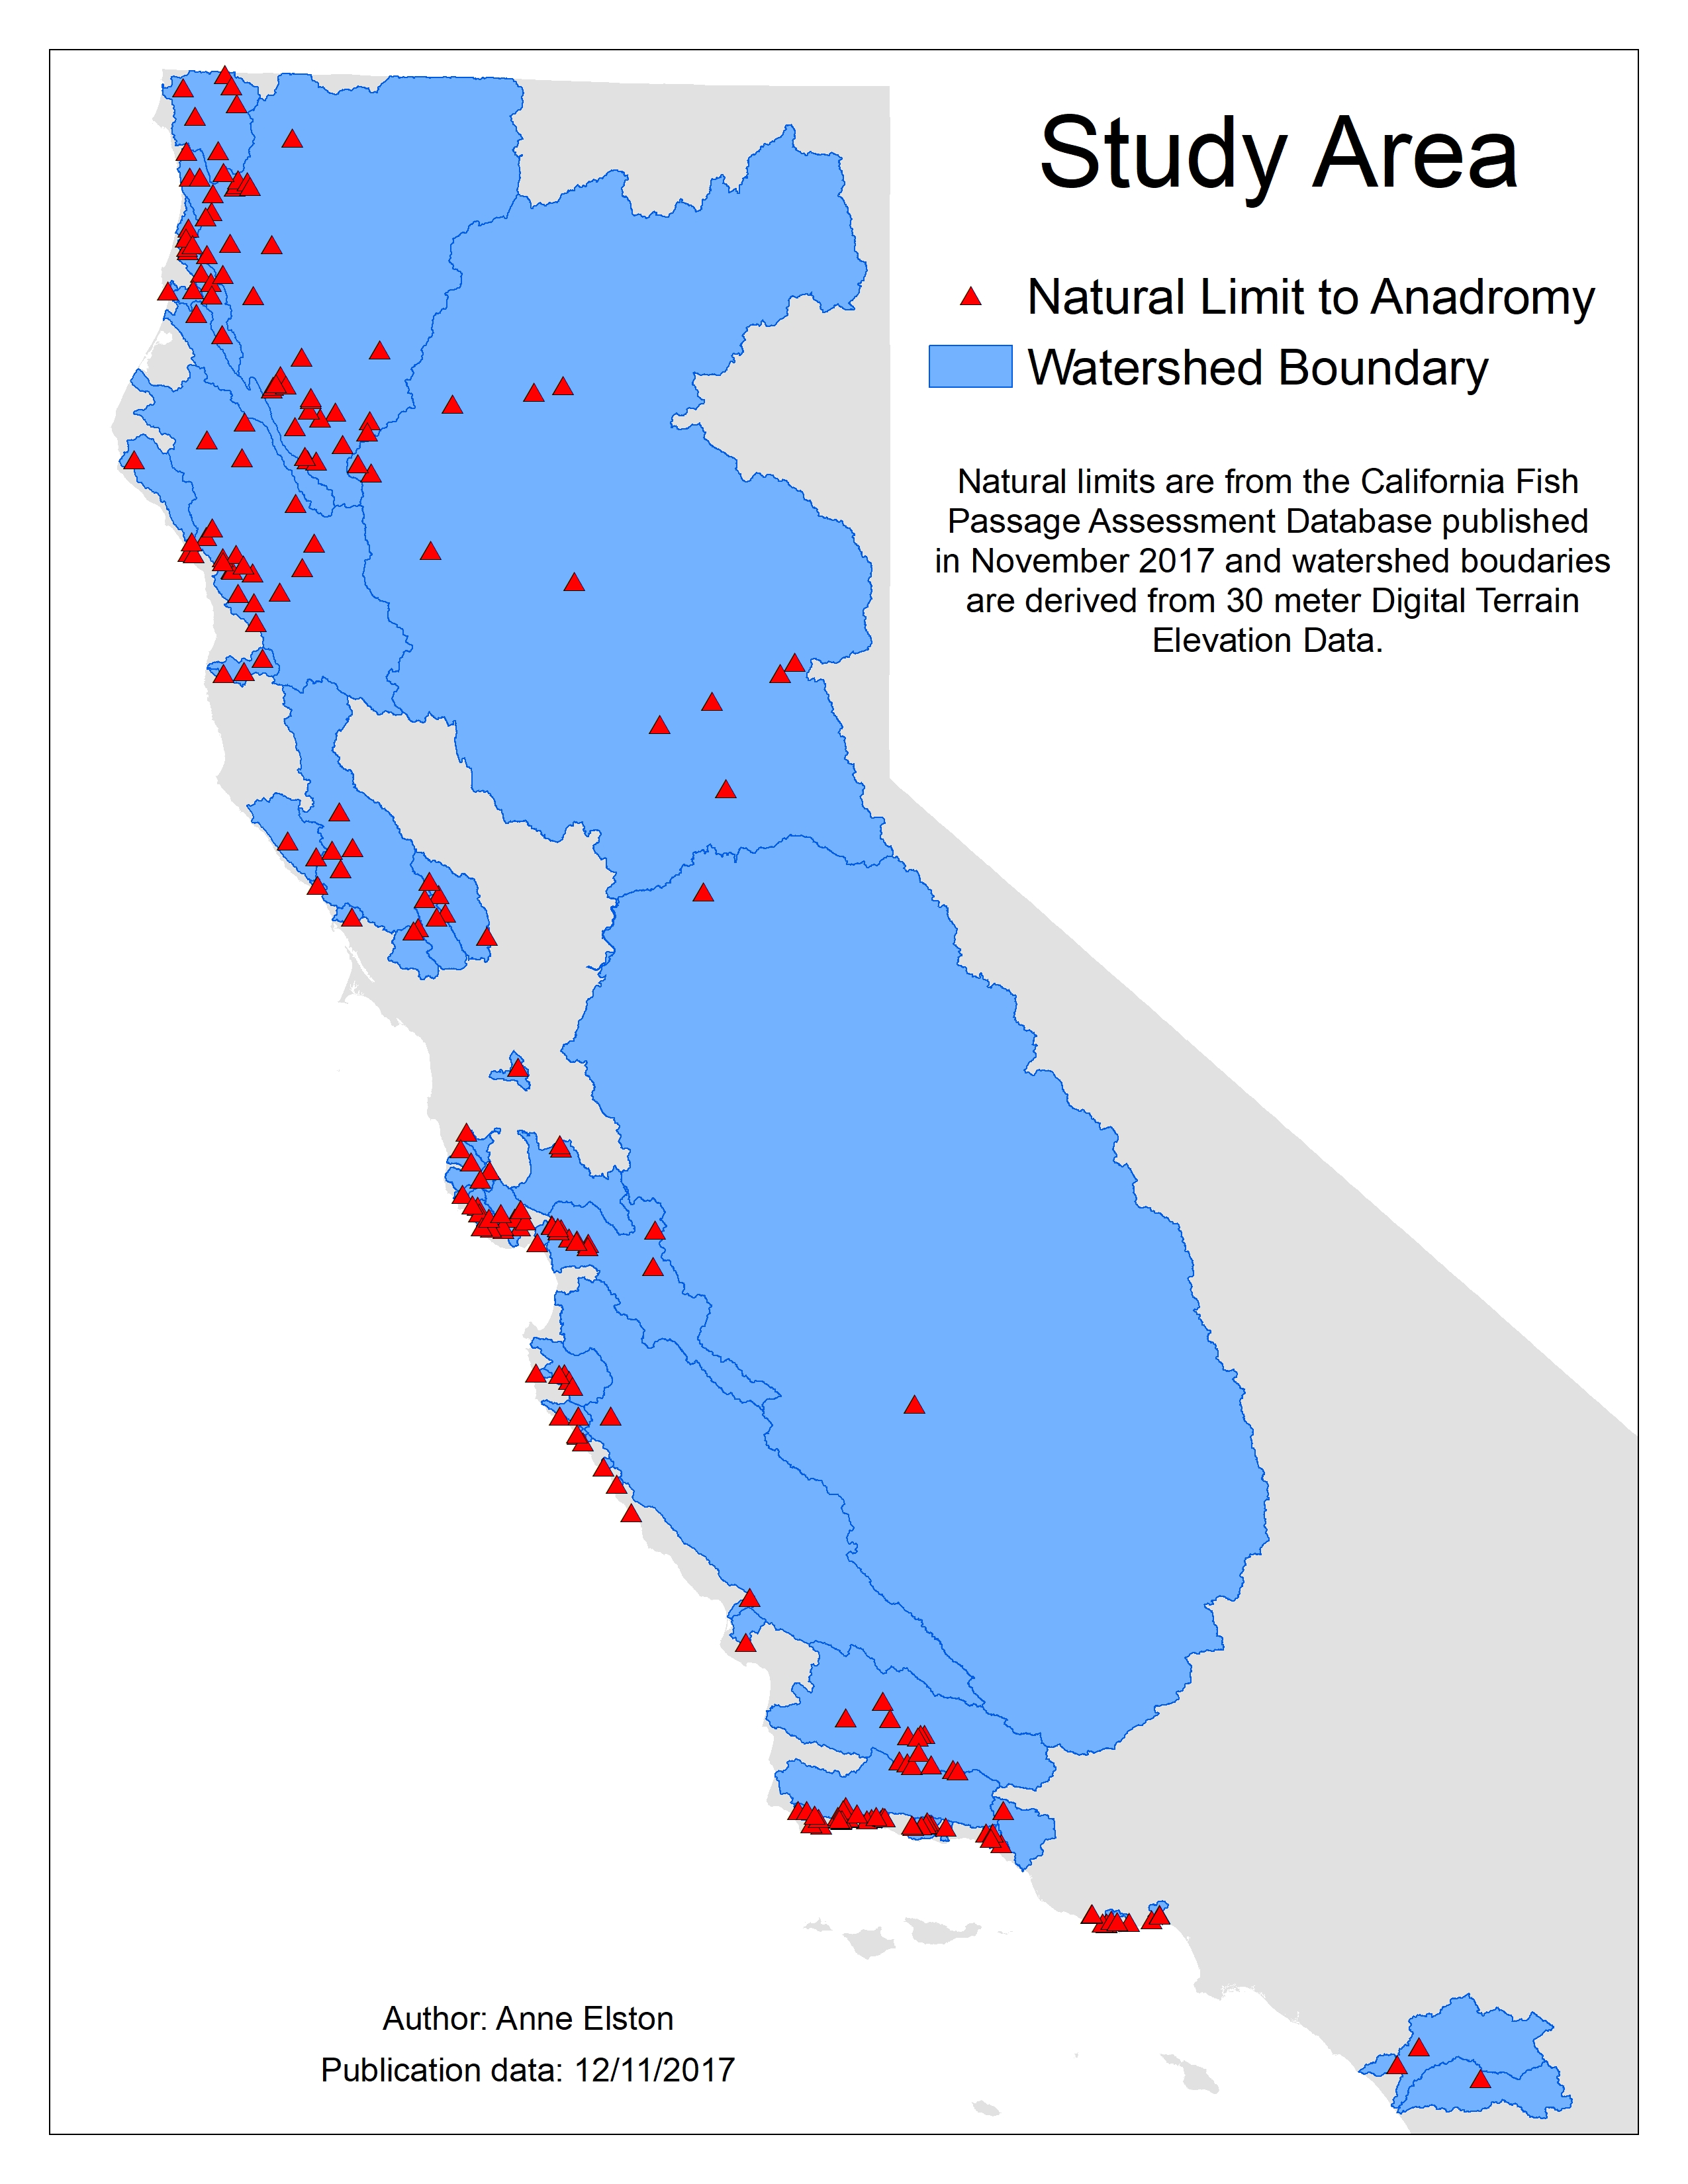 Figure 2. Study Area (Watersheds) and Sample of Known Natural Limits to Anadromy.